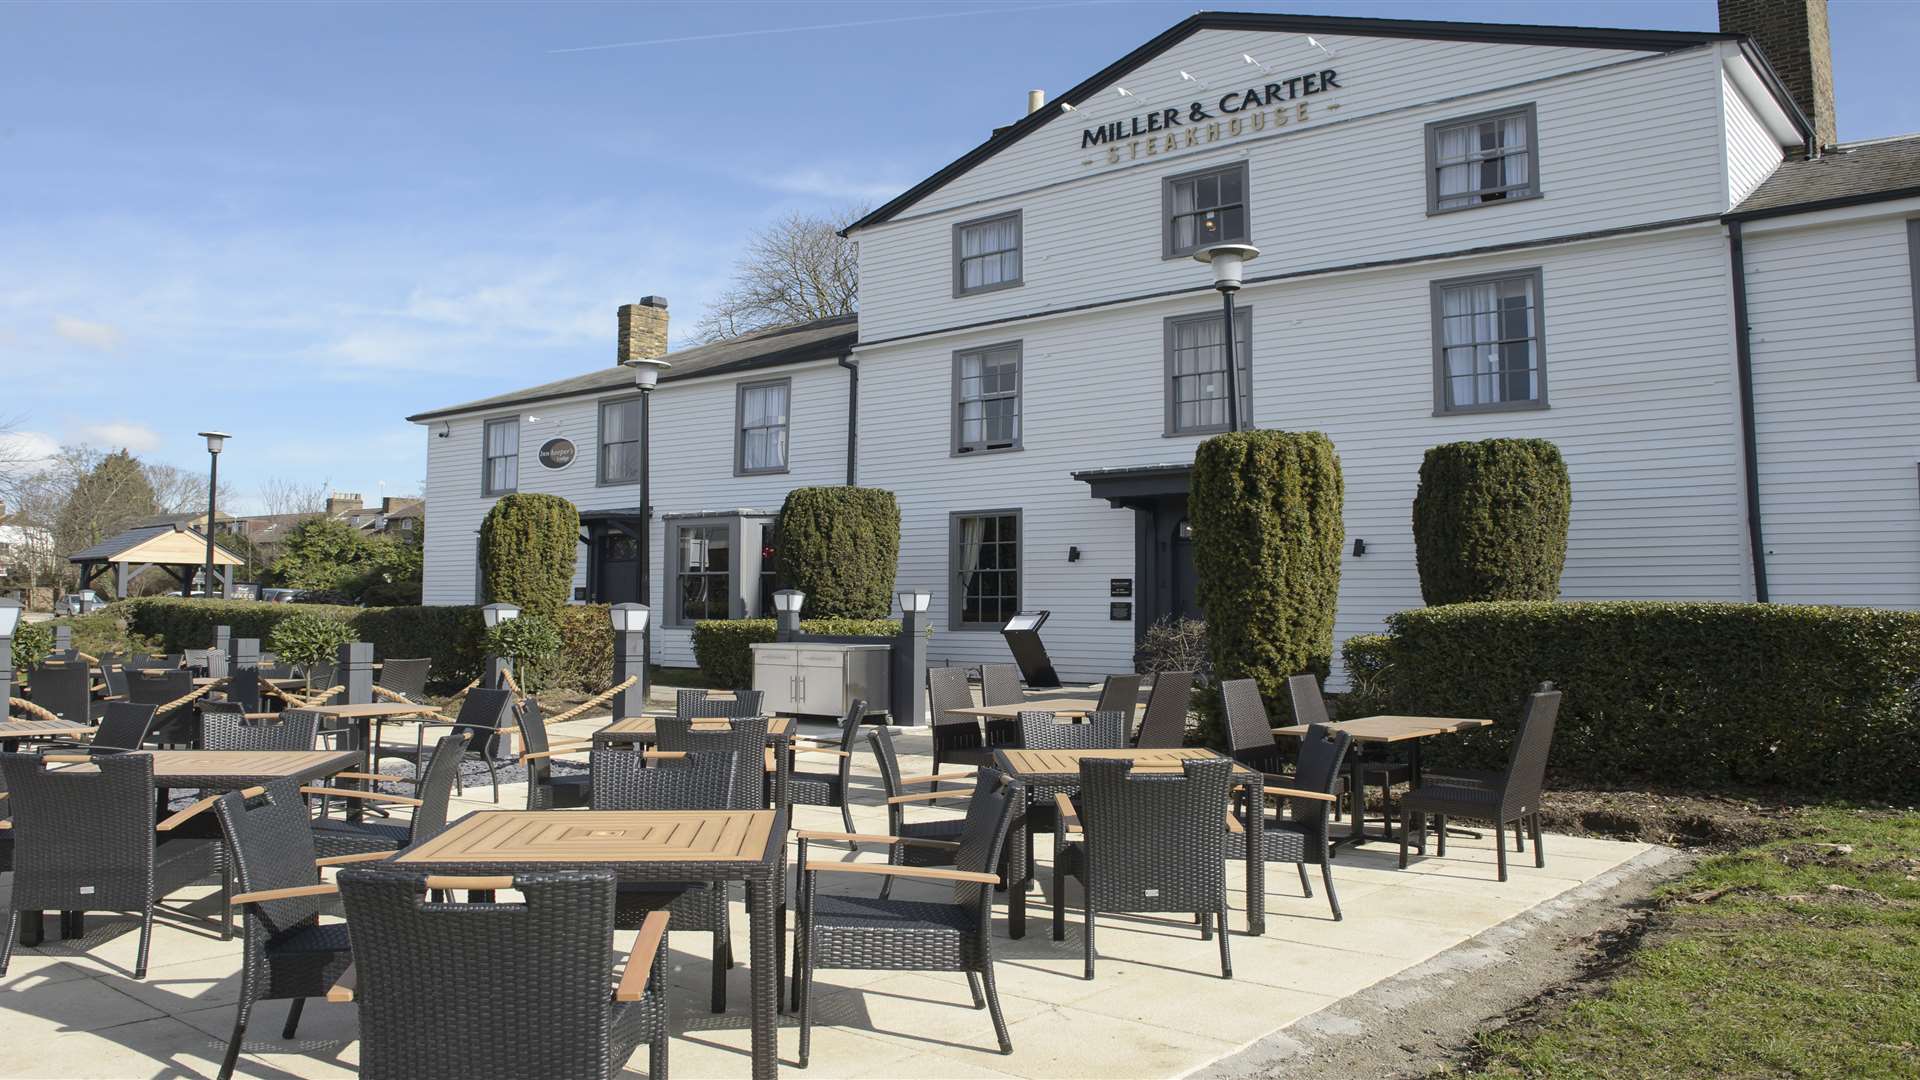 The White Rabbit pub in Sandling Road has been converted into a Miller and Carter steakhouse